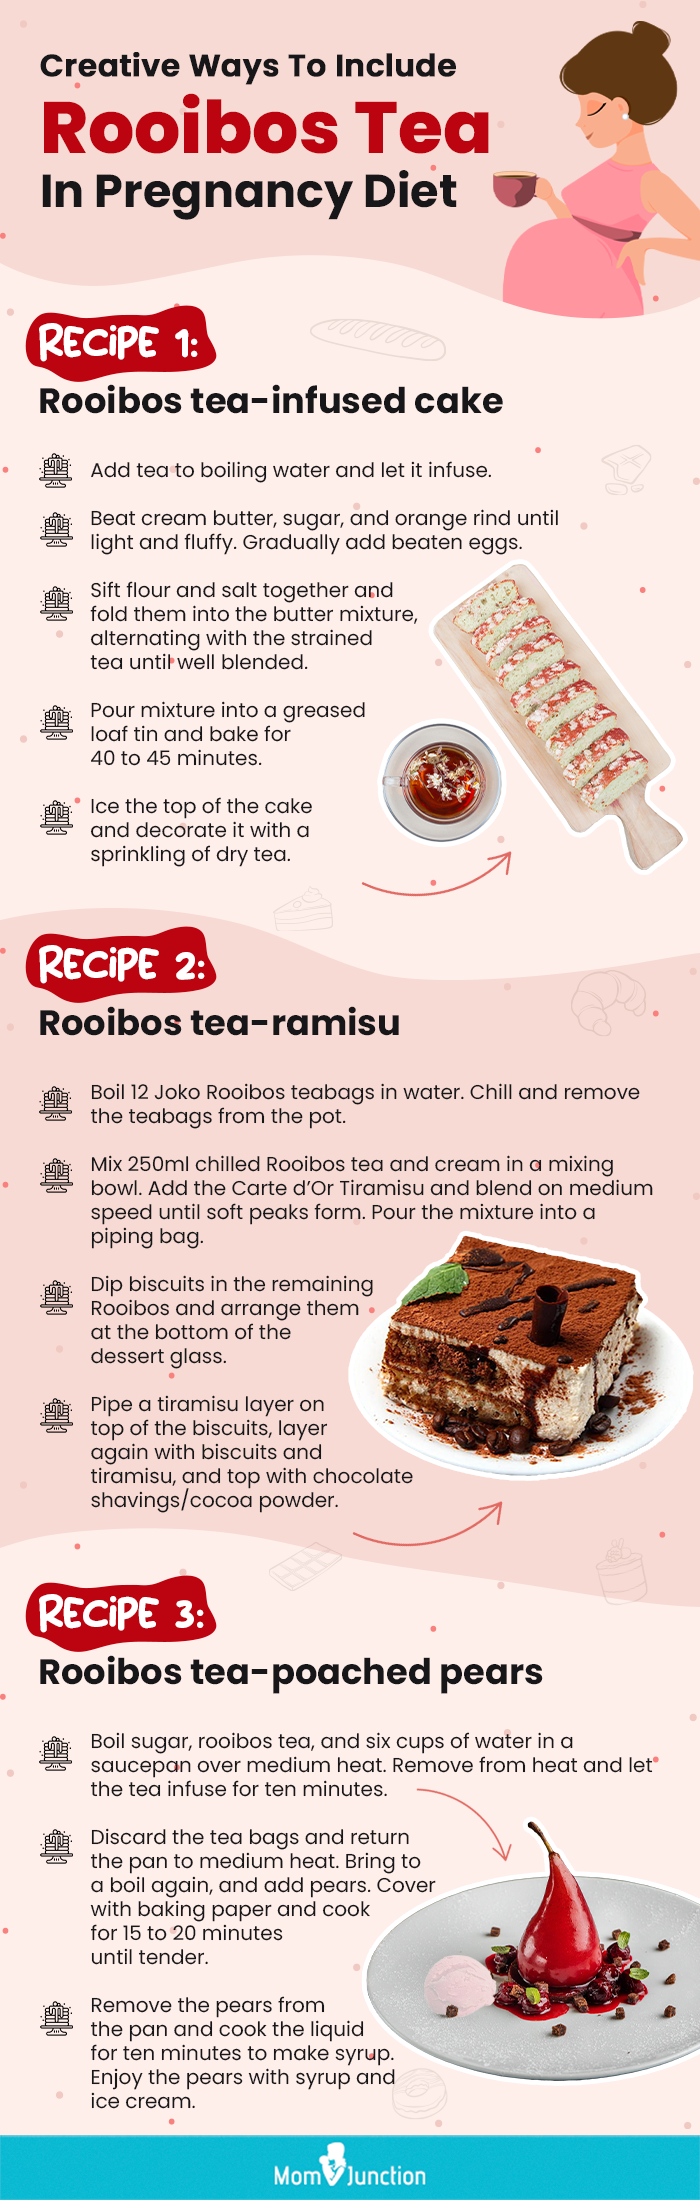 creative ways to include rooibos tea in pregnancy diet (infographic)